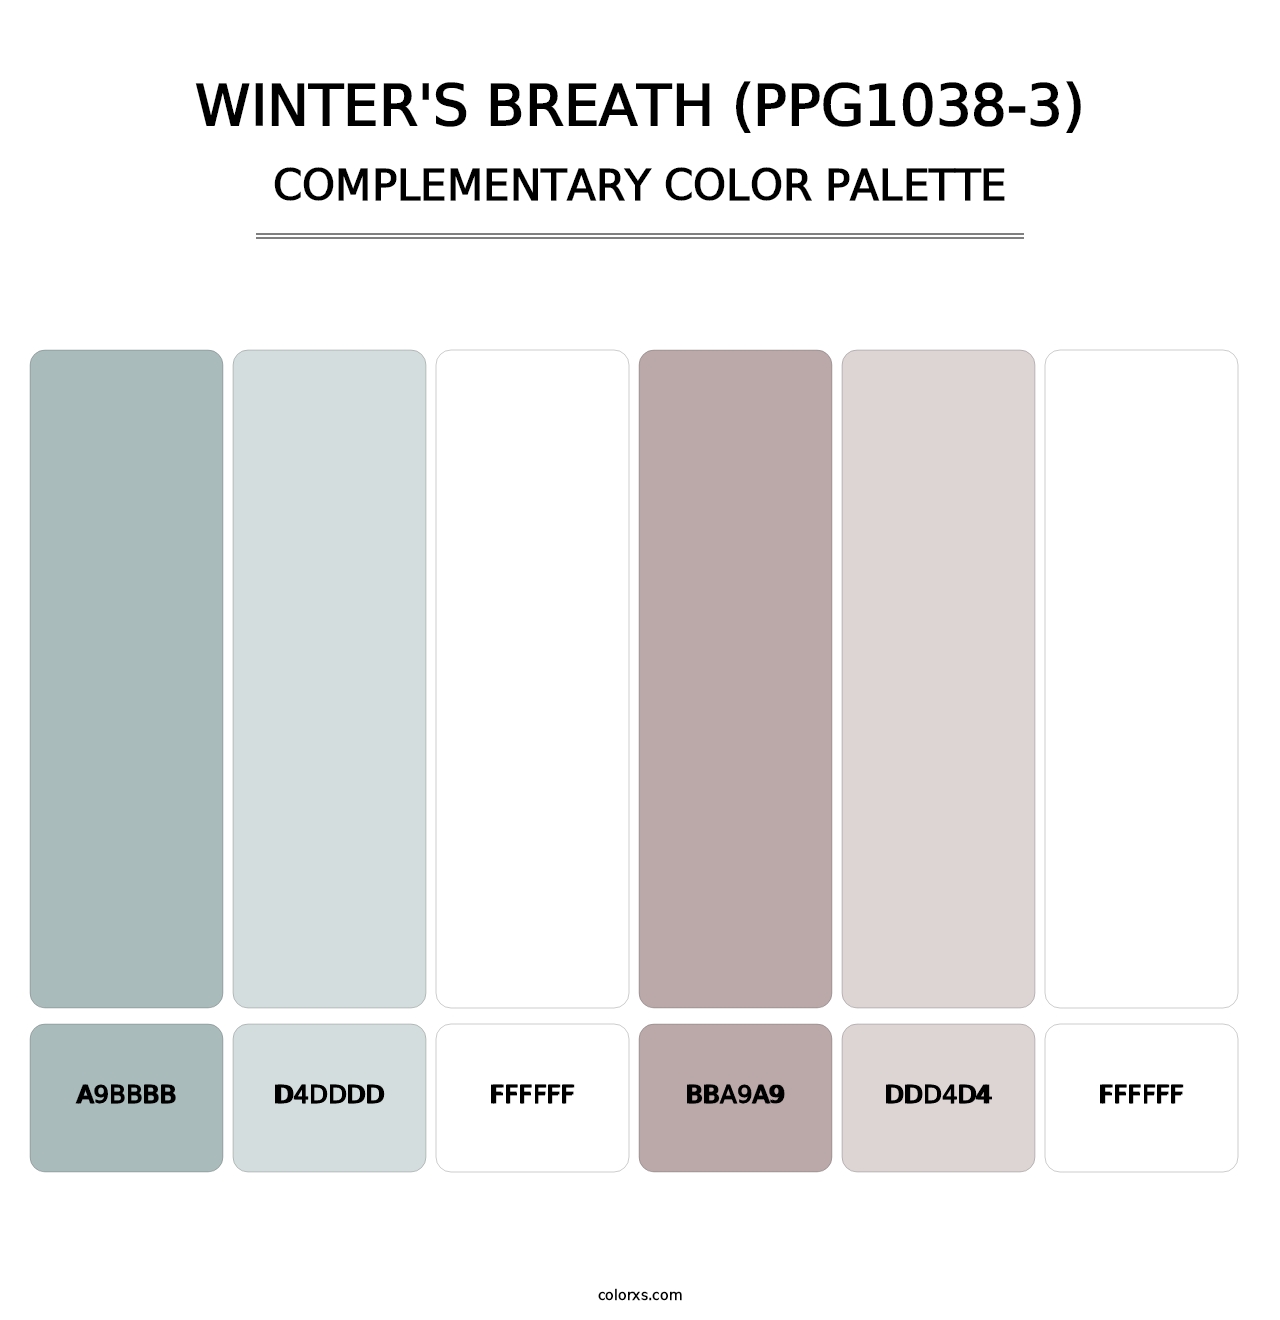 Winter's Breath (PPG1038-3) - Complementary Color Palette